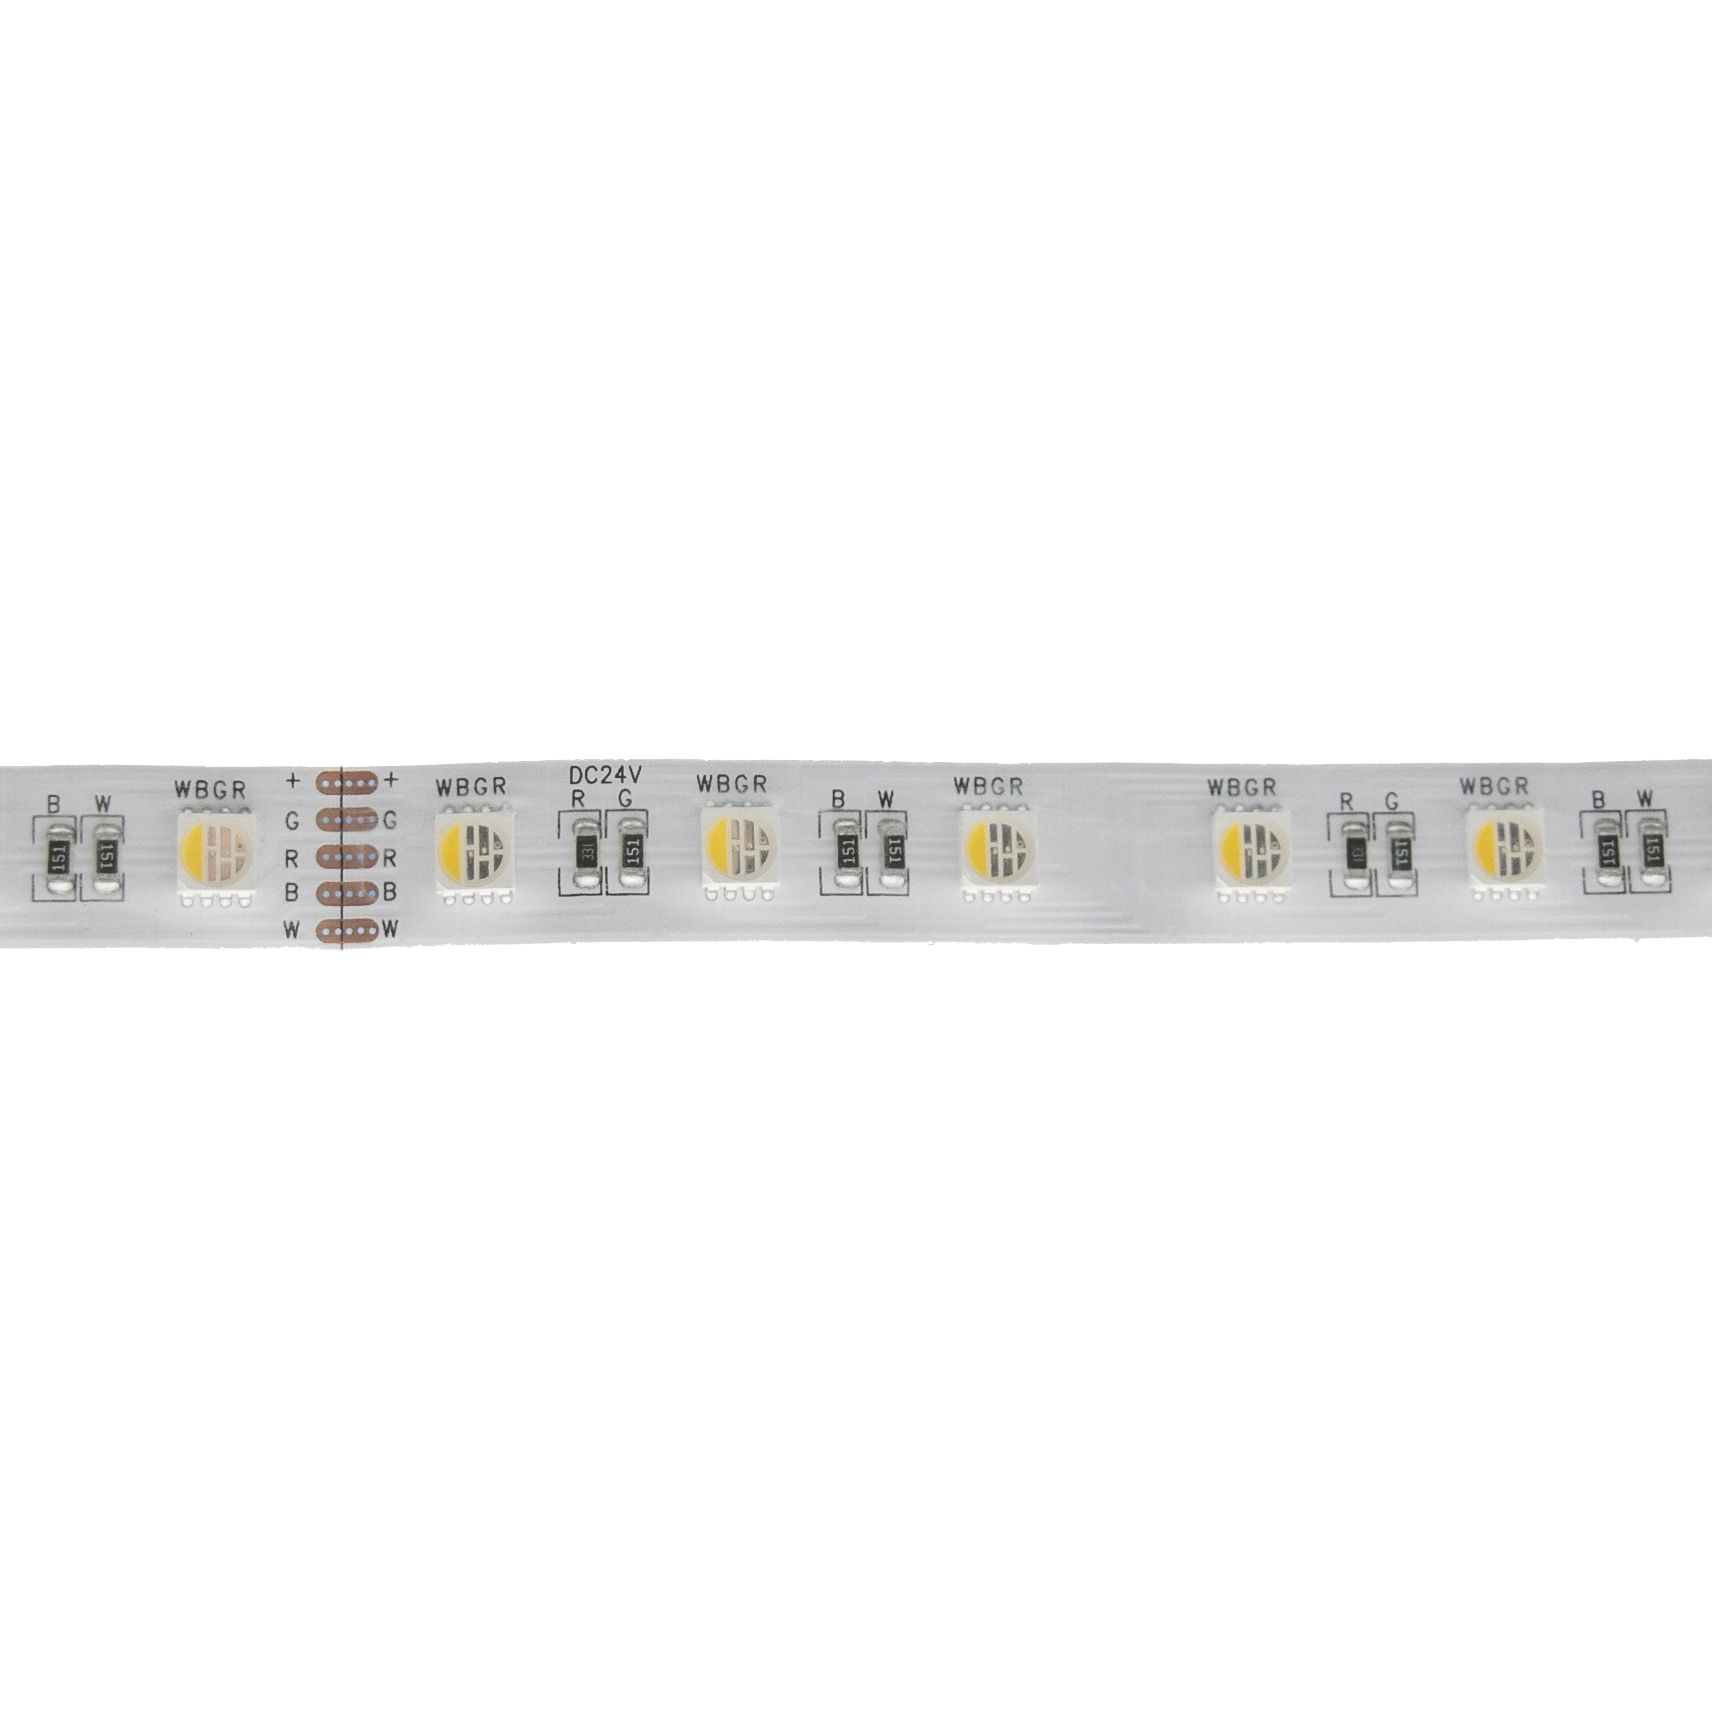 High-Quality 24V LED Strips from Finnish Company - Brighten Up Your Space